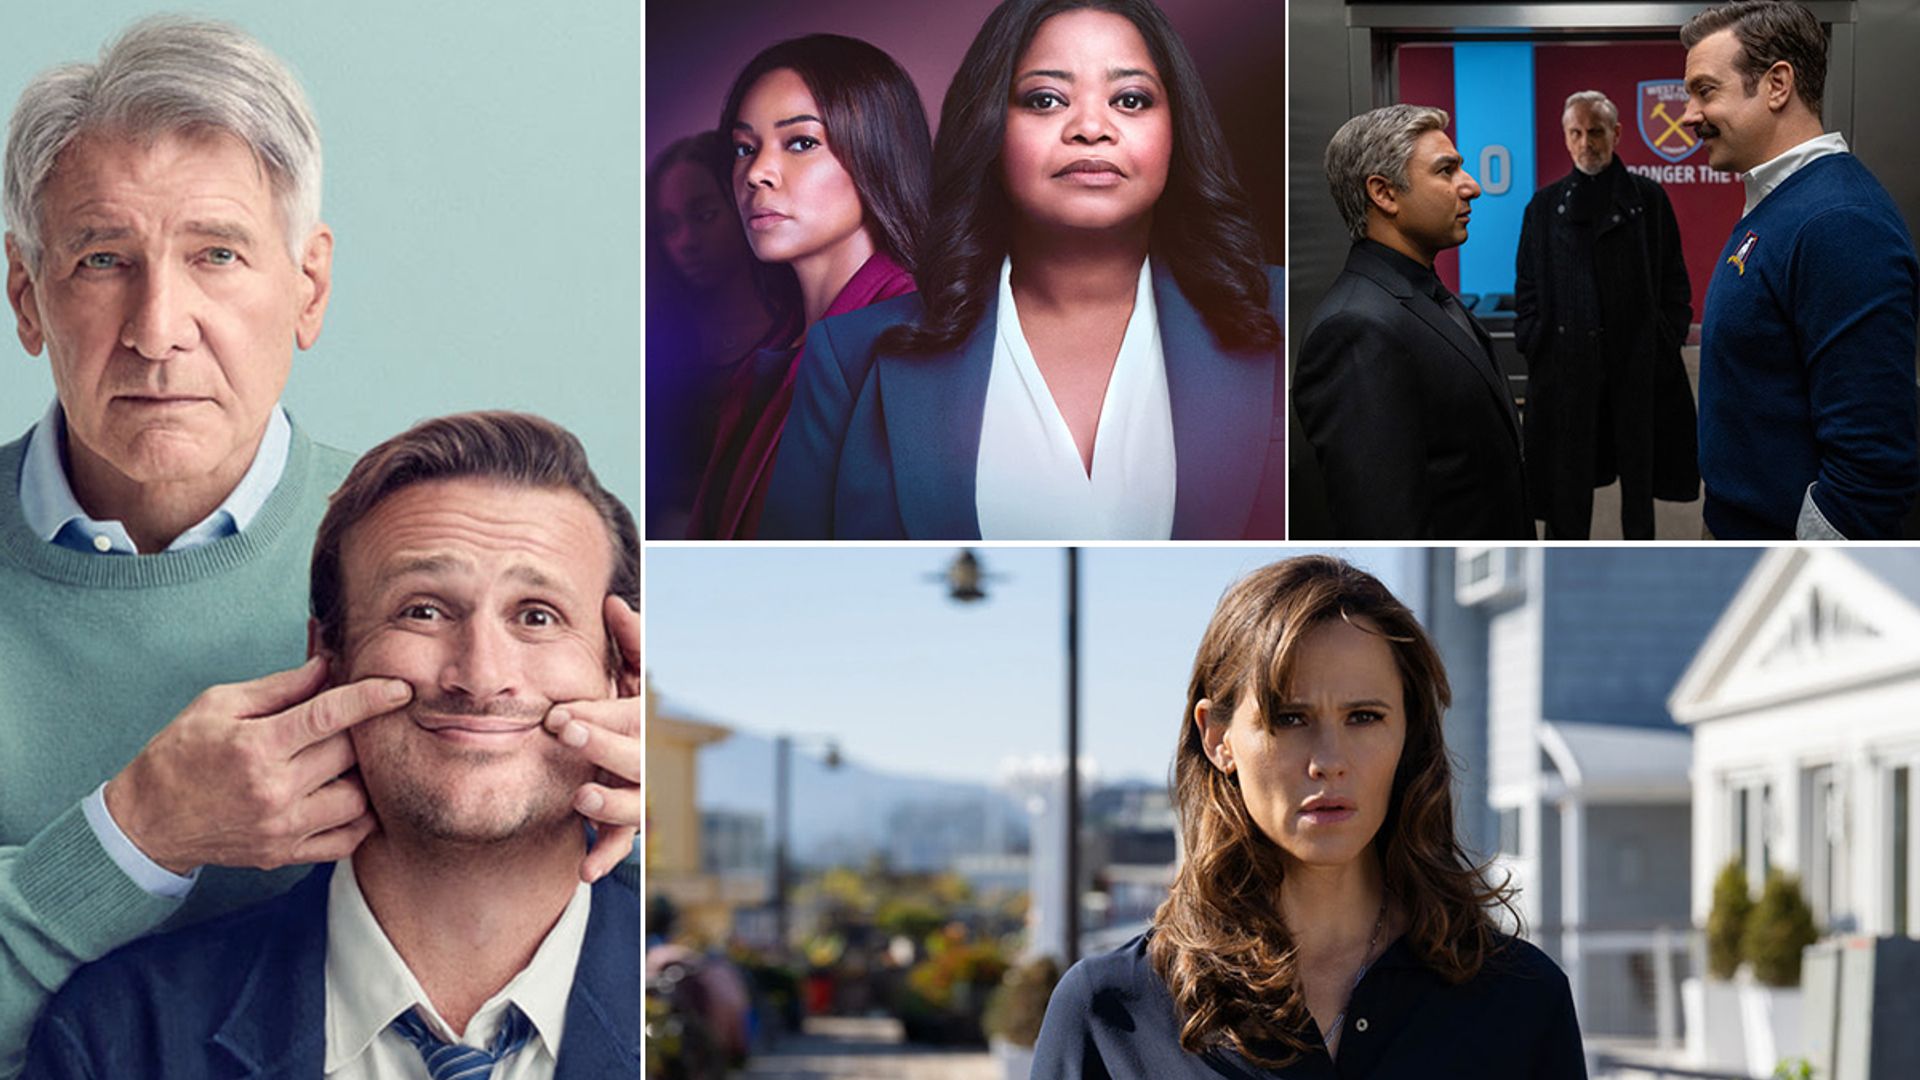 5 amazing Apple TV+ shows coming in 2023